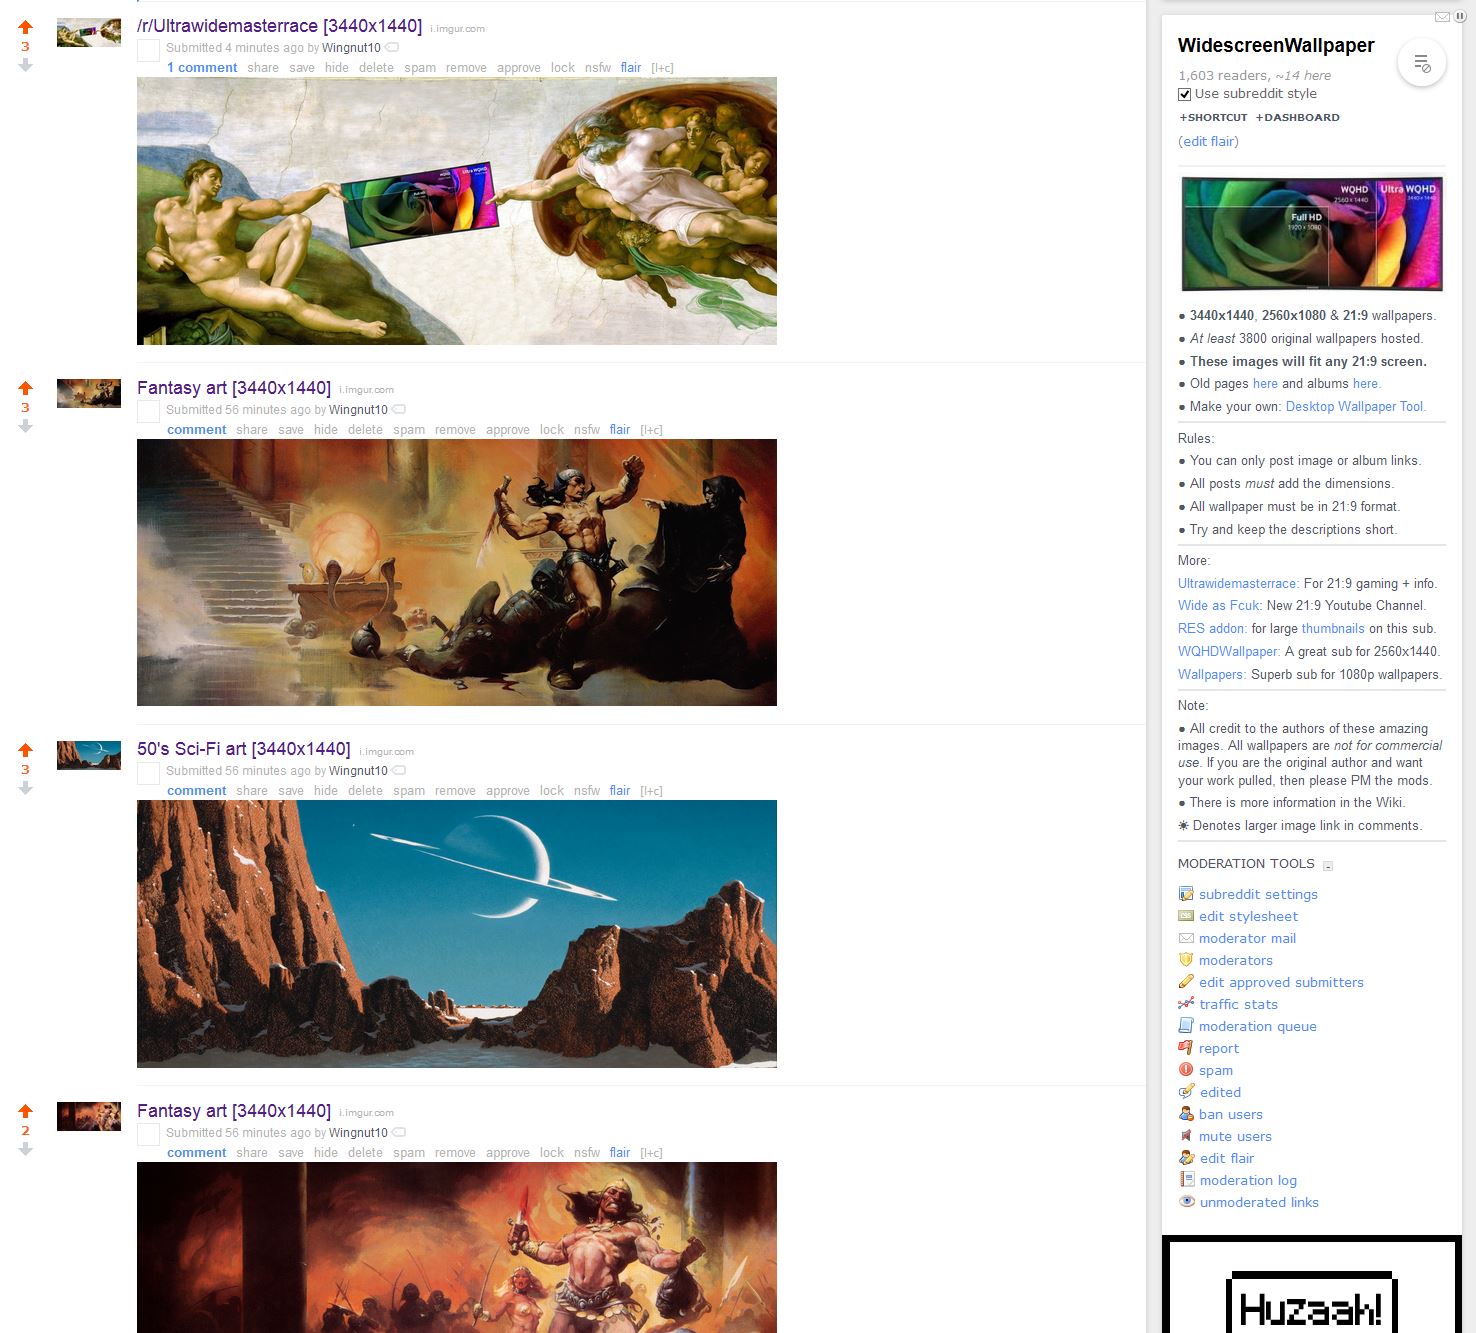 Res Addon For Large Thumbnails On